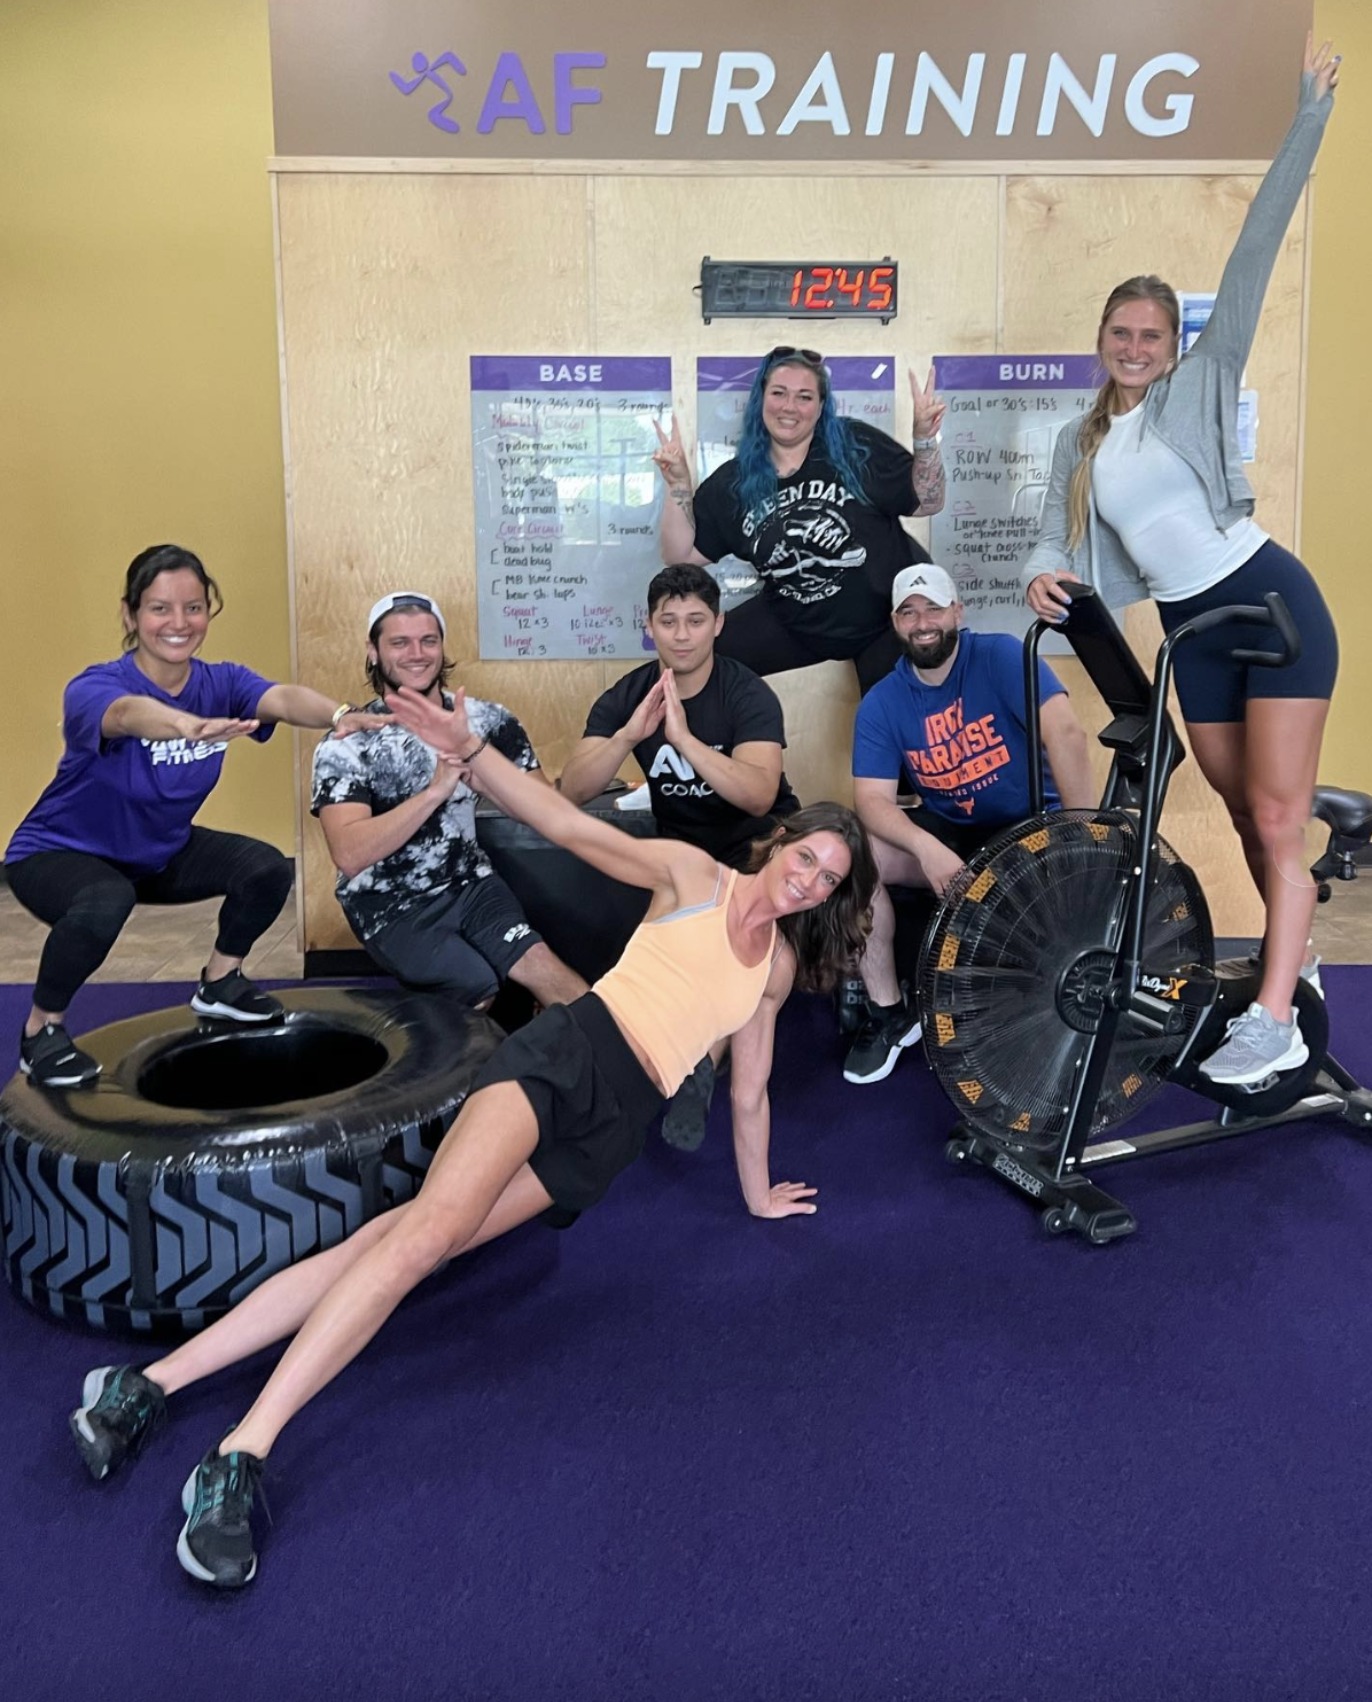 Anytime Fitness 181 Avondale-Haslet Rd, Haslet Texas 76052